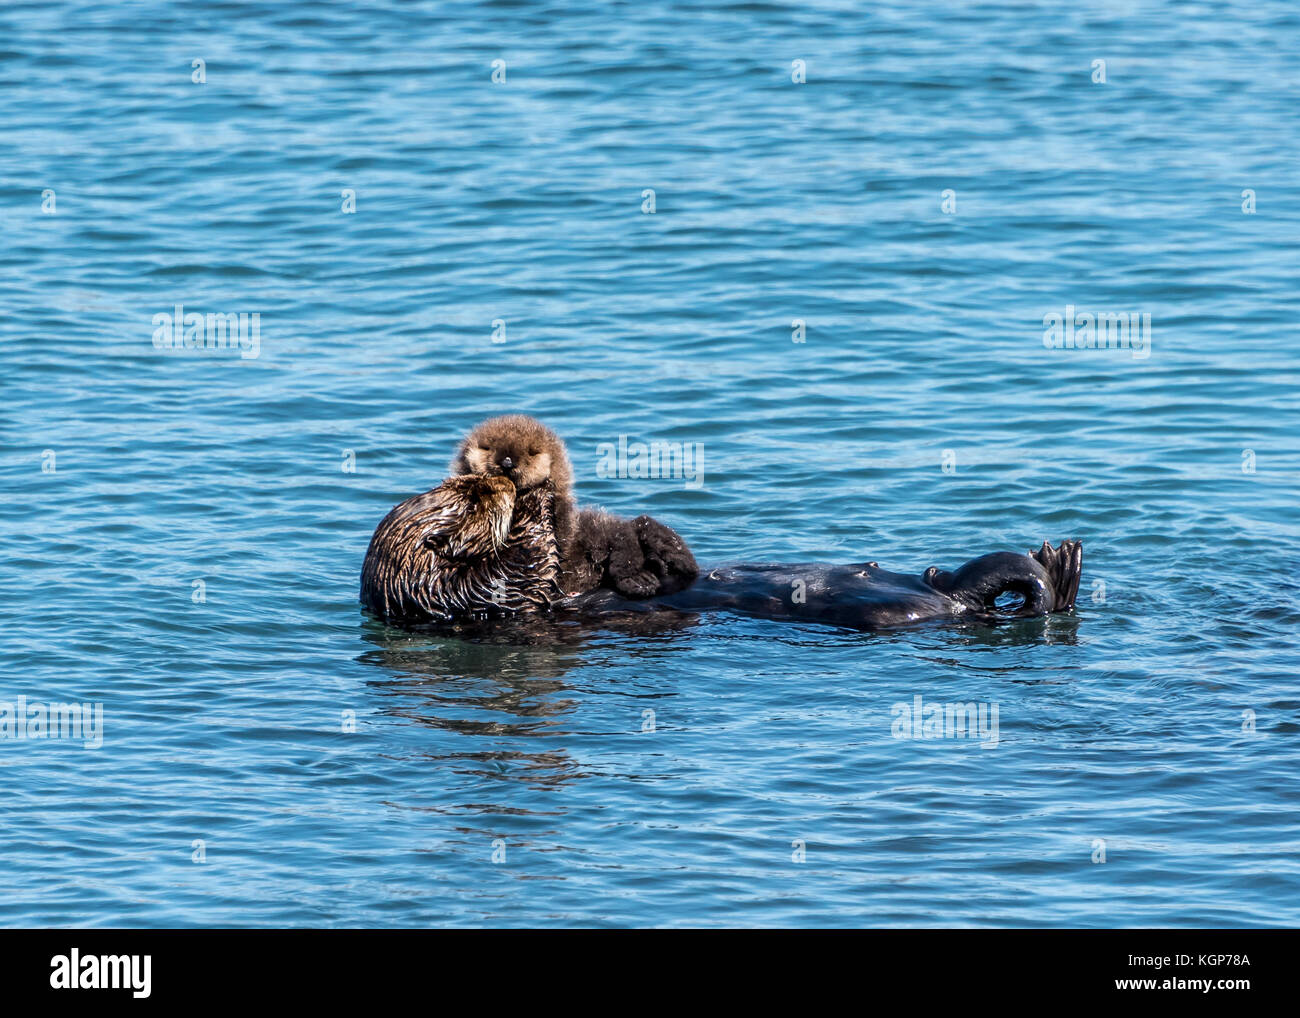 Brown mother sea otter with baby sea otter, holds up cute baby otter to her face as if kissing, while floating in water at Morro Bay, California. Stock Photo